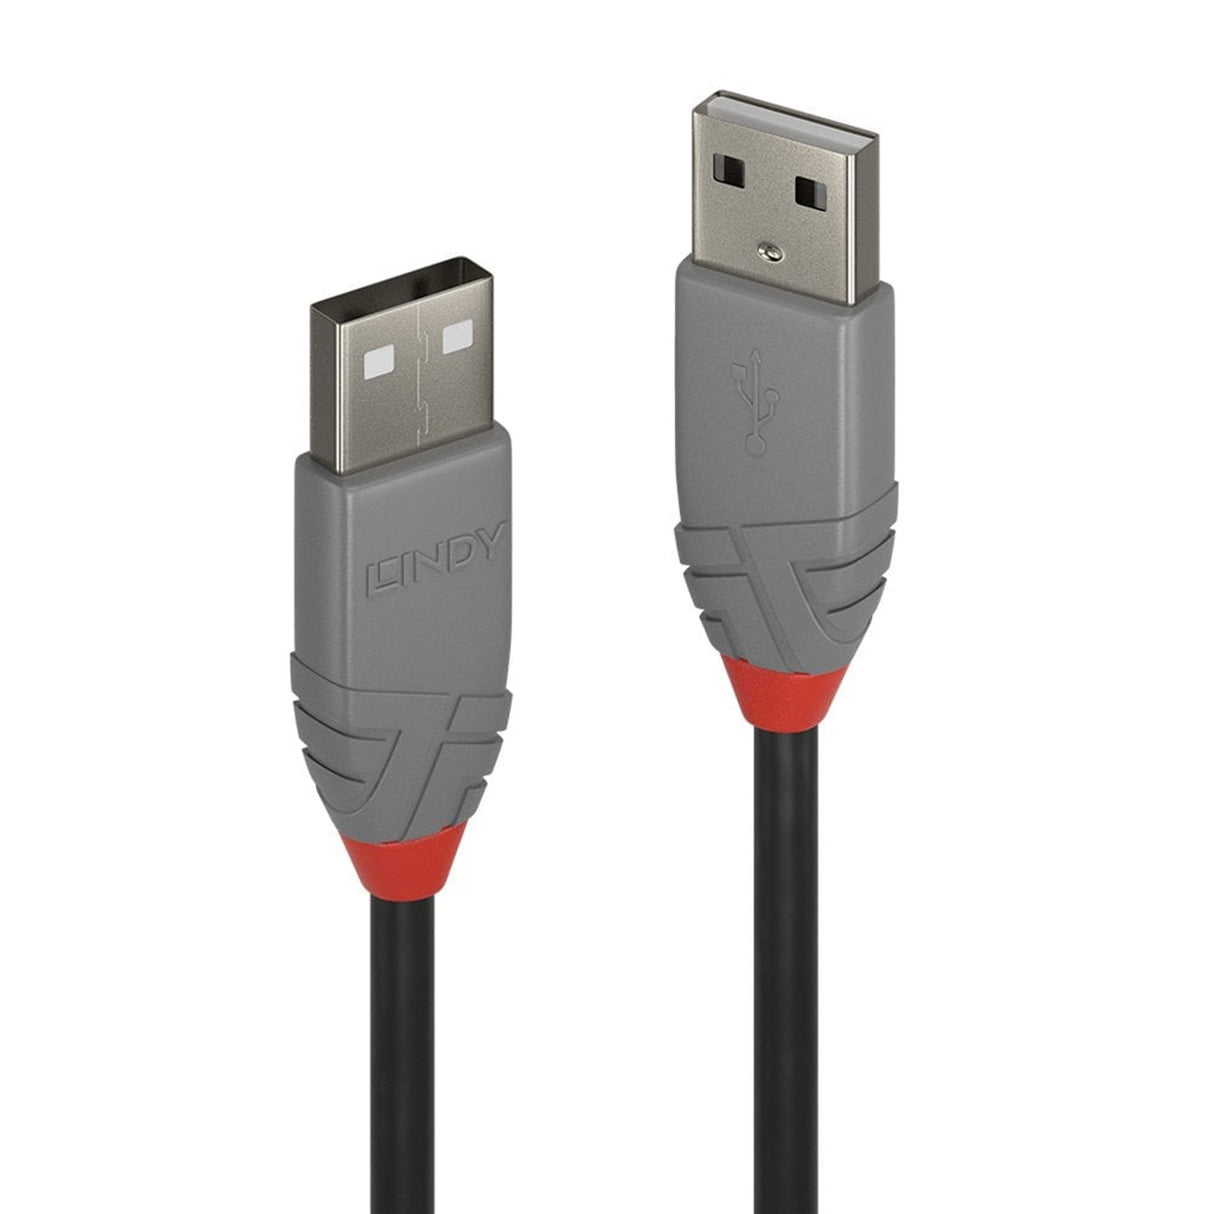 LINDY 36693 Anthra Line USB Cable, USB 2.0 Type-A (M) to USB 2.0 Type-a (M), 2m, Black & Red, Supports Data Transfer Speeds up to 480Mbps, Robust PVC Housing, Nickel Connectors & Gold Plated Contacts, Retail Polybag Packaging